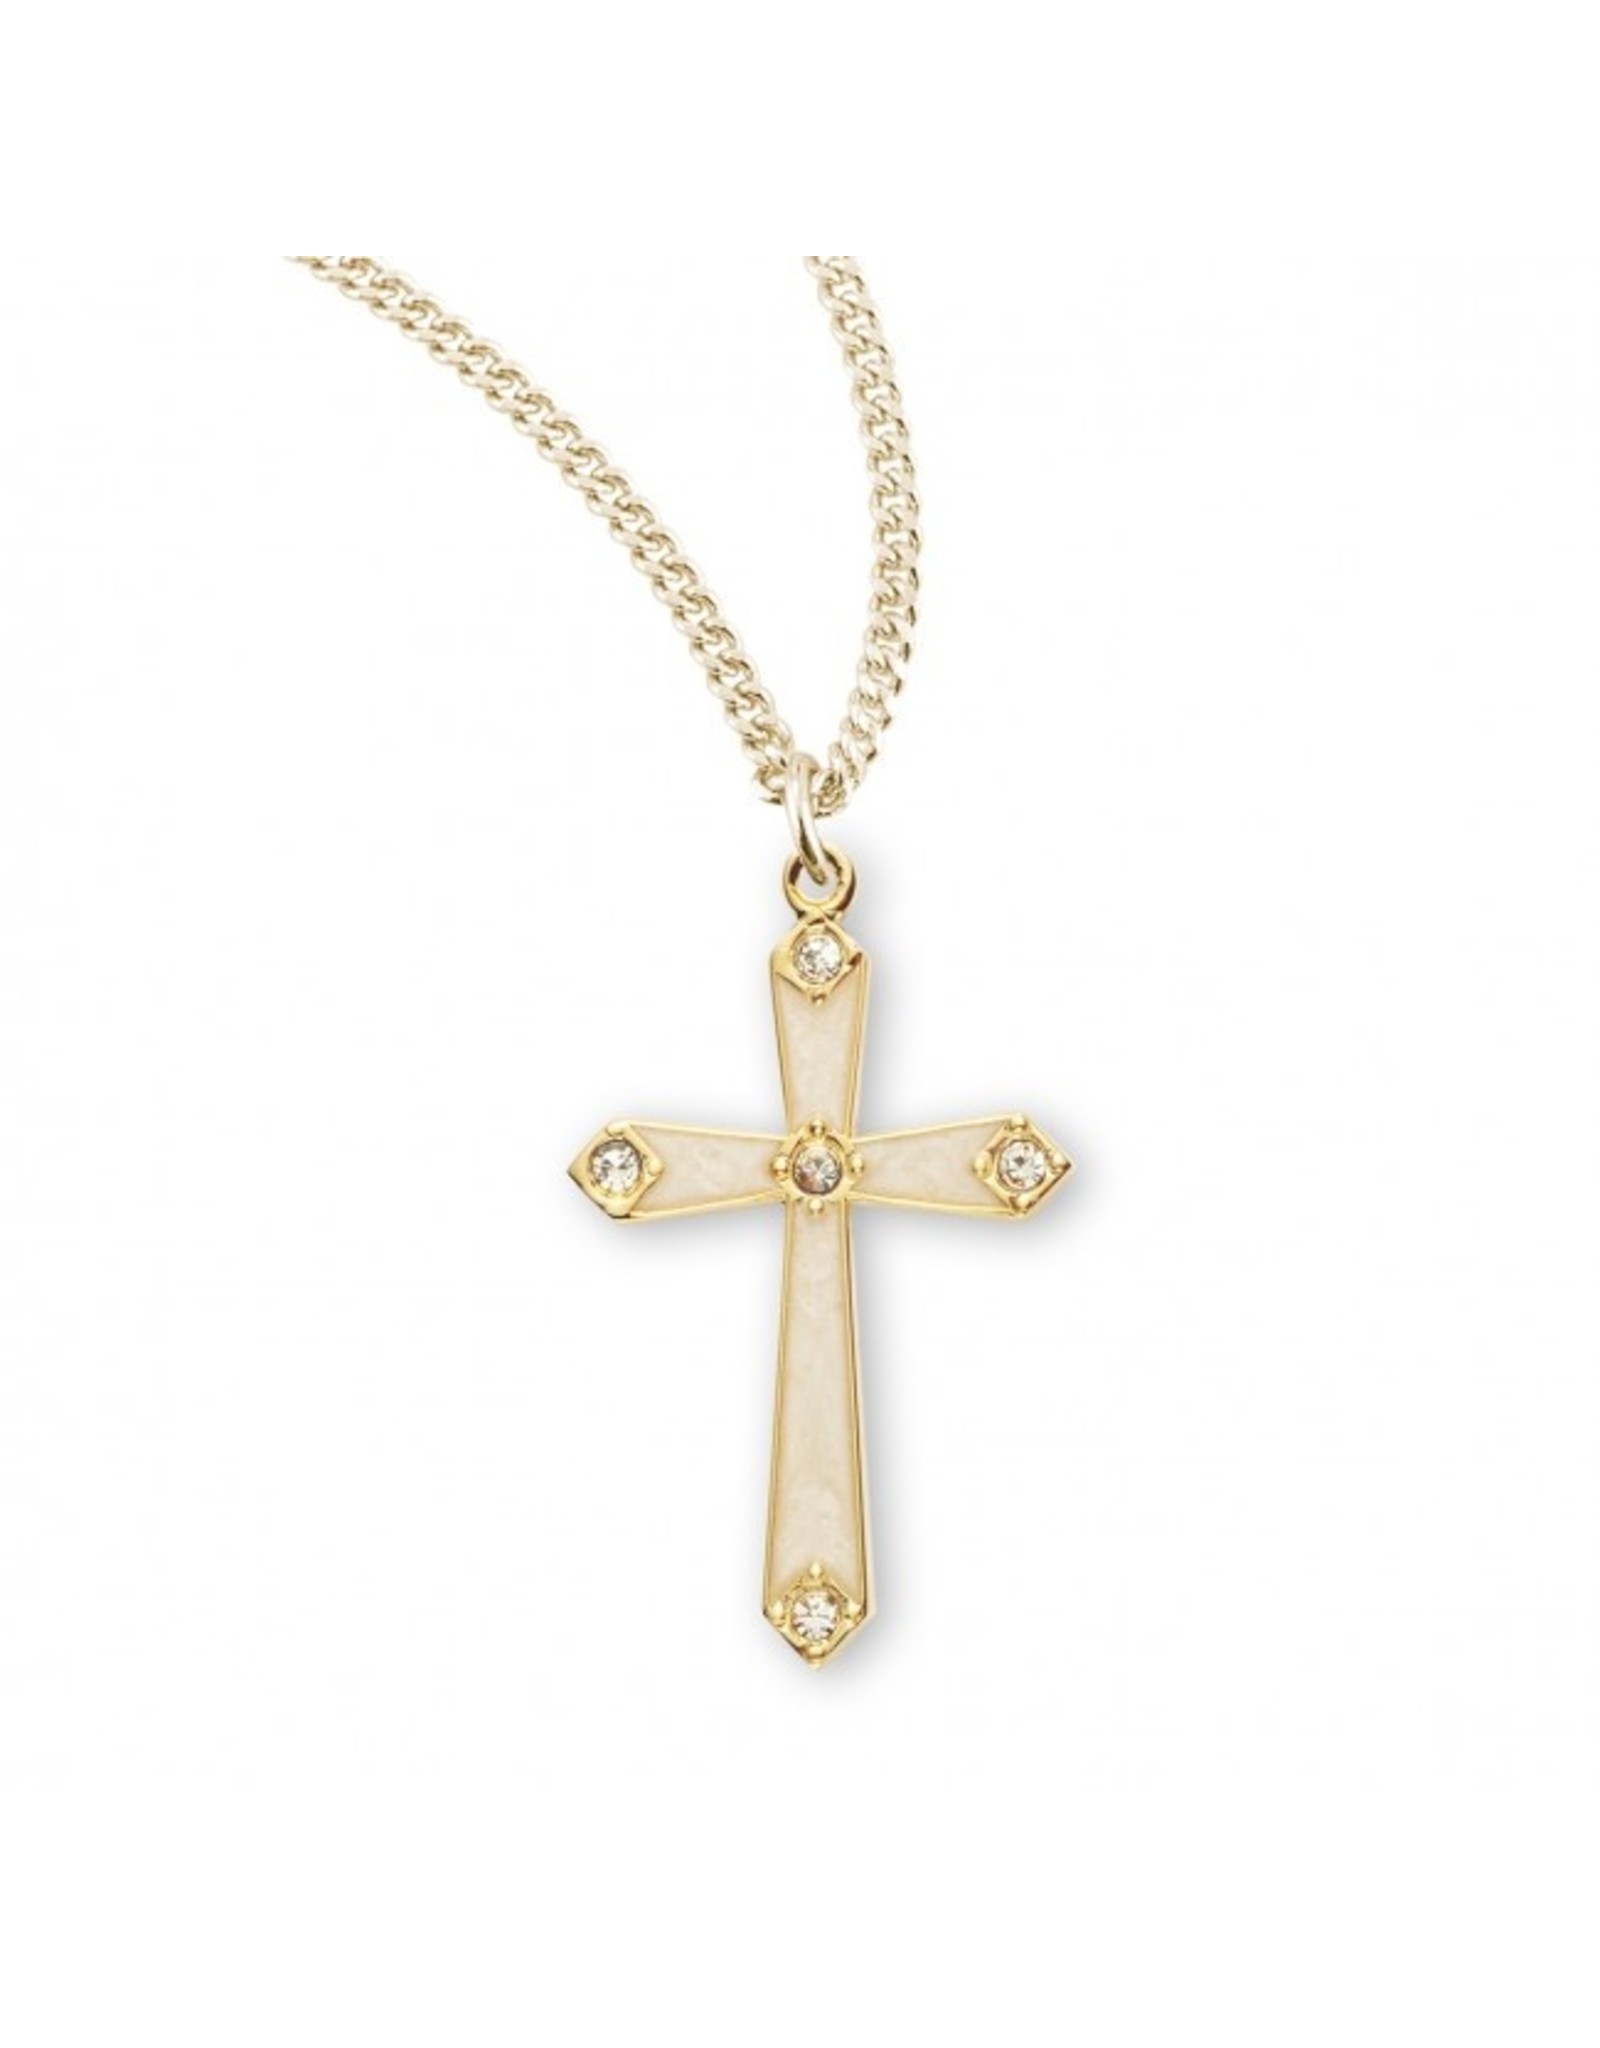 HMH Cross Medal, Pearl Enameled with Five Crystals, Gold over Sterling Silver, 18" Chain